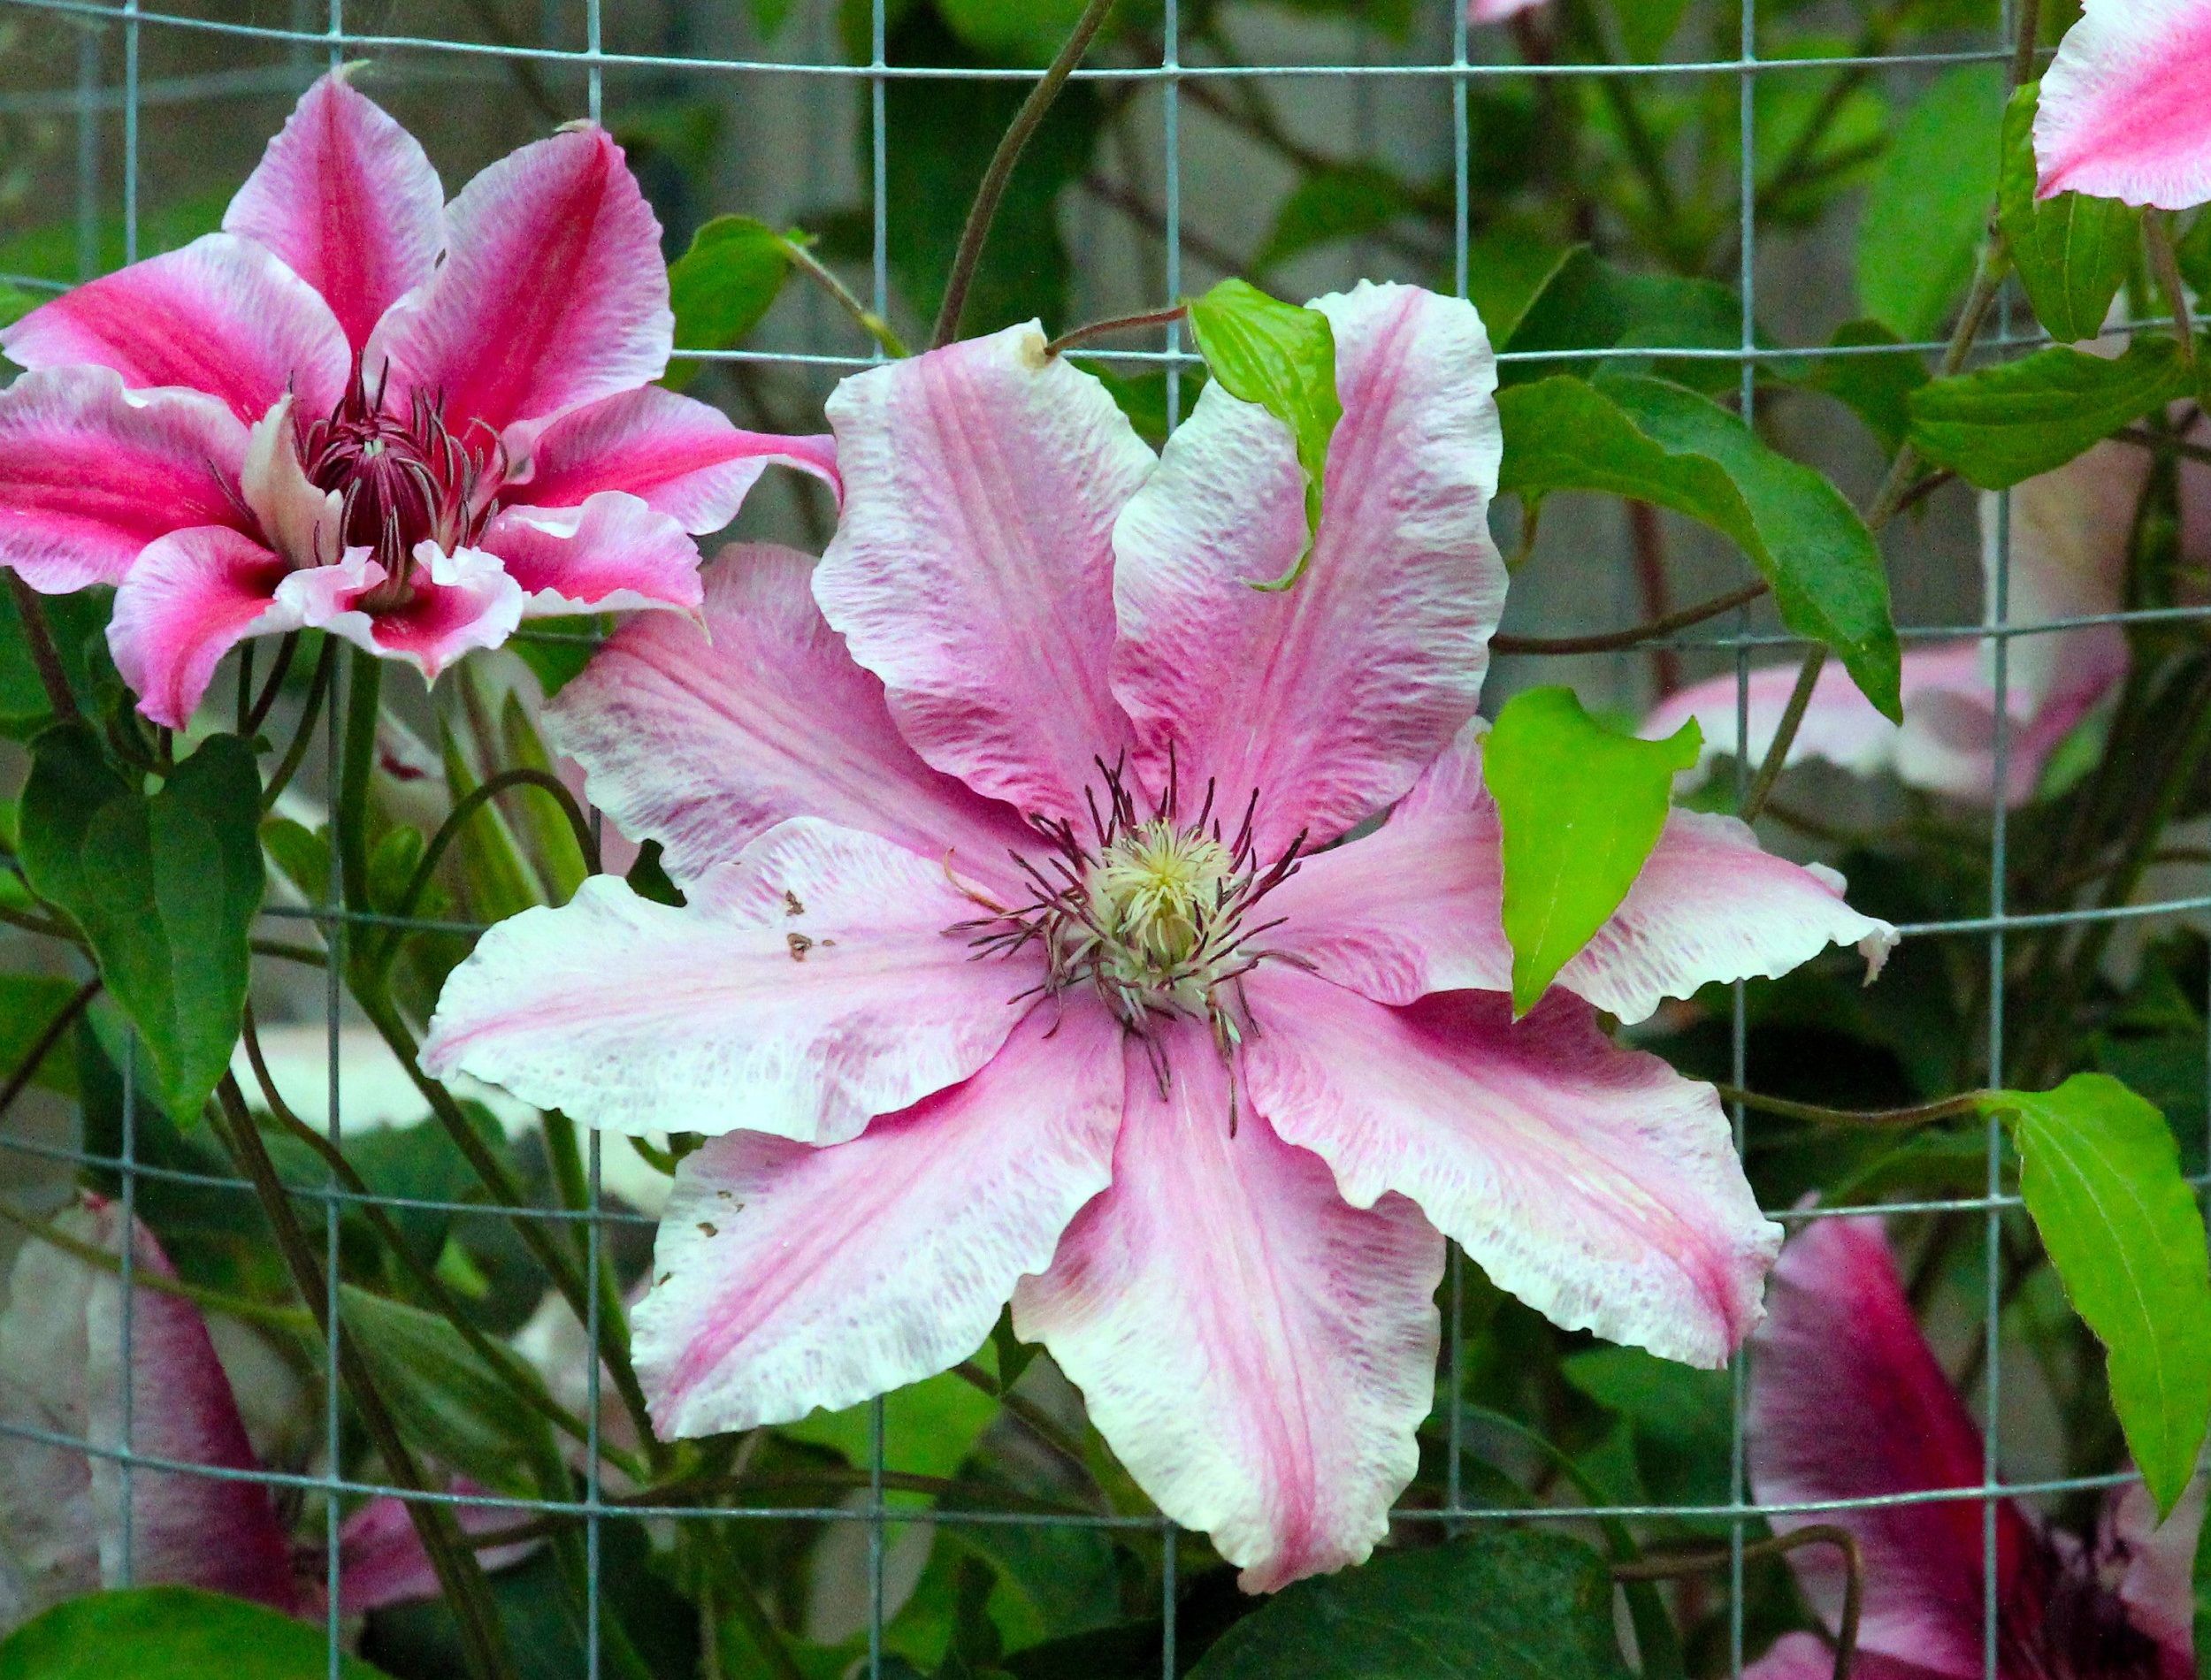 Clematis plant in full bloom being supported by a wire cage